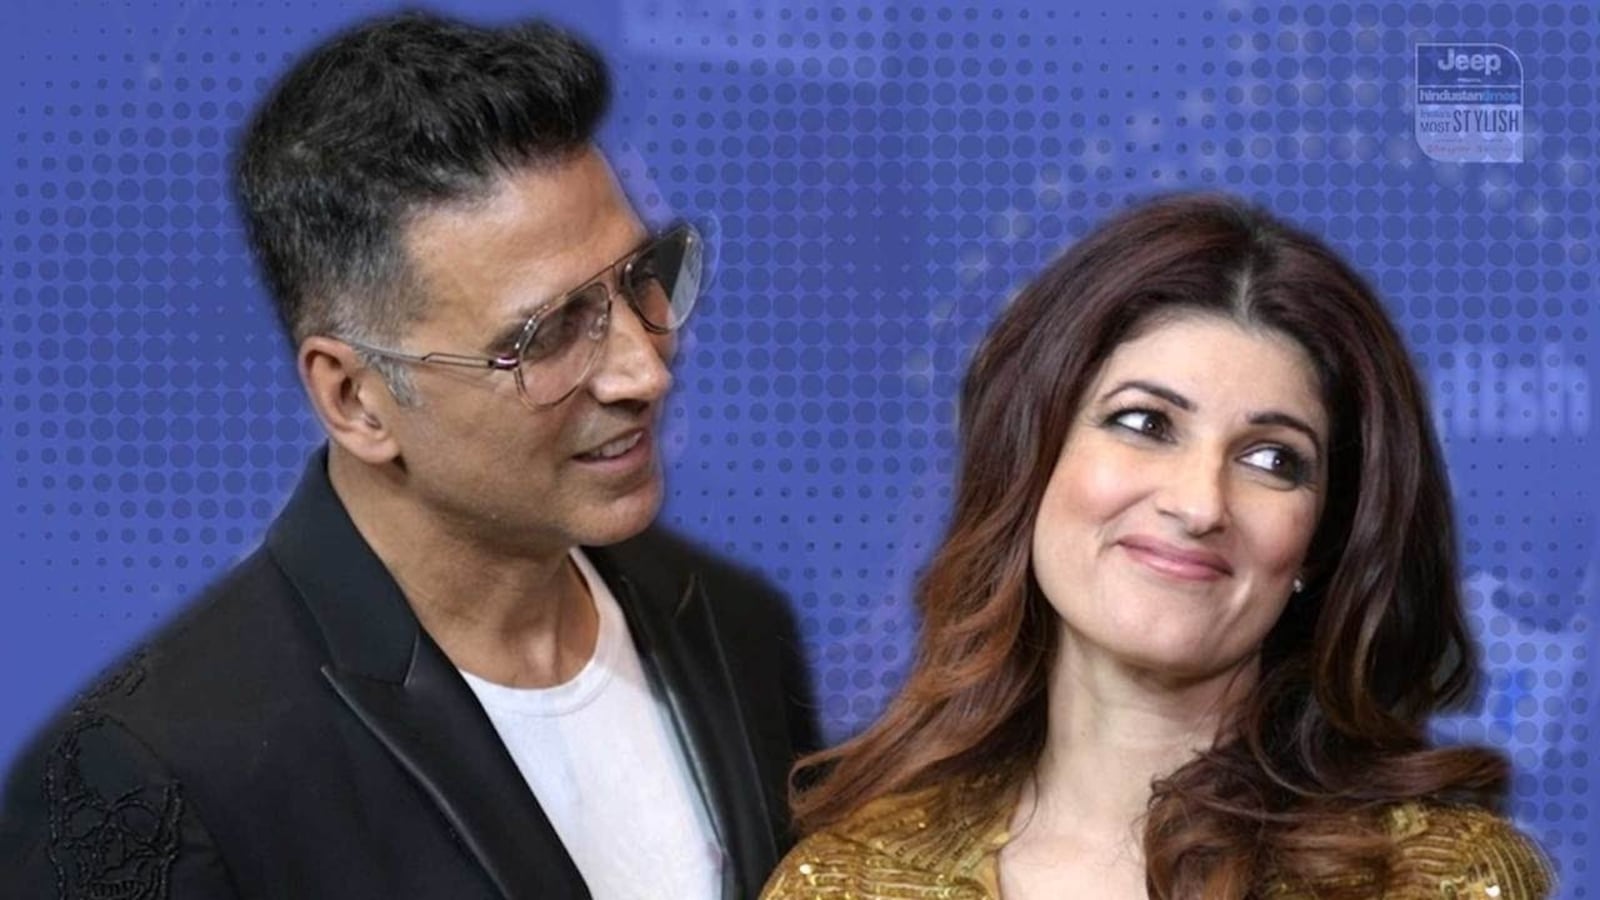 Www Tunkal Khan Sex - Twinkle Khanna gets advice on 'what not to write' by Akshay: 'I touch her  feet' | Web Series - Hindustan Times